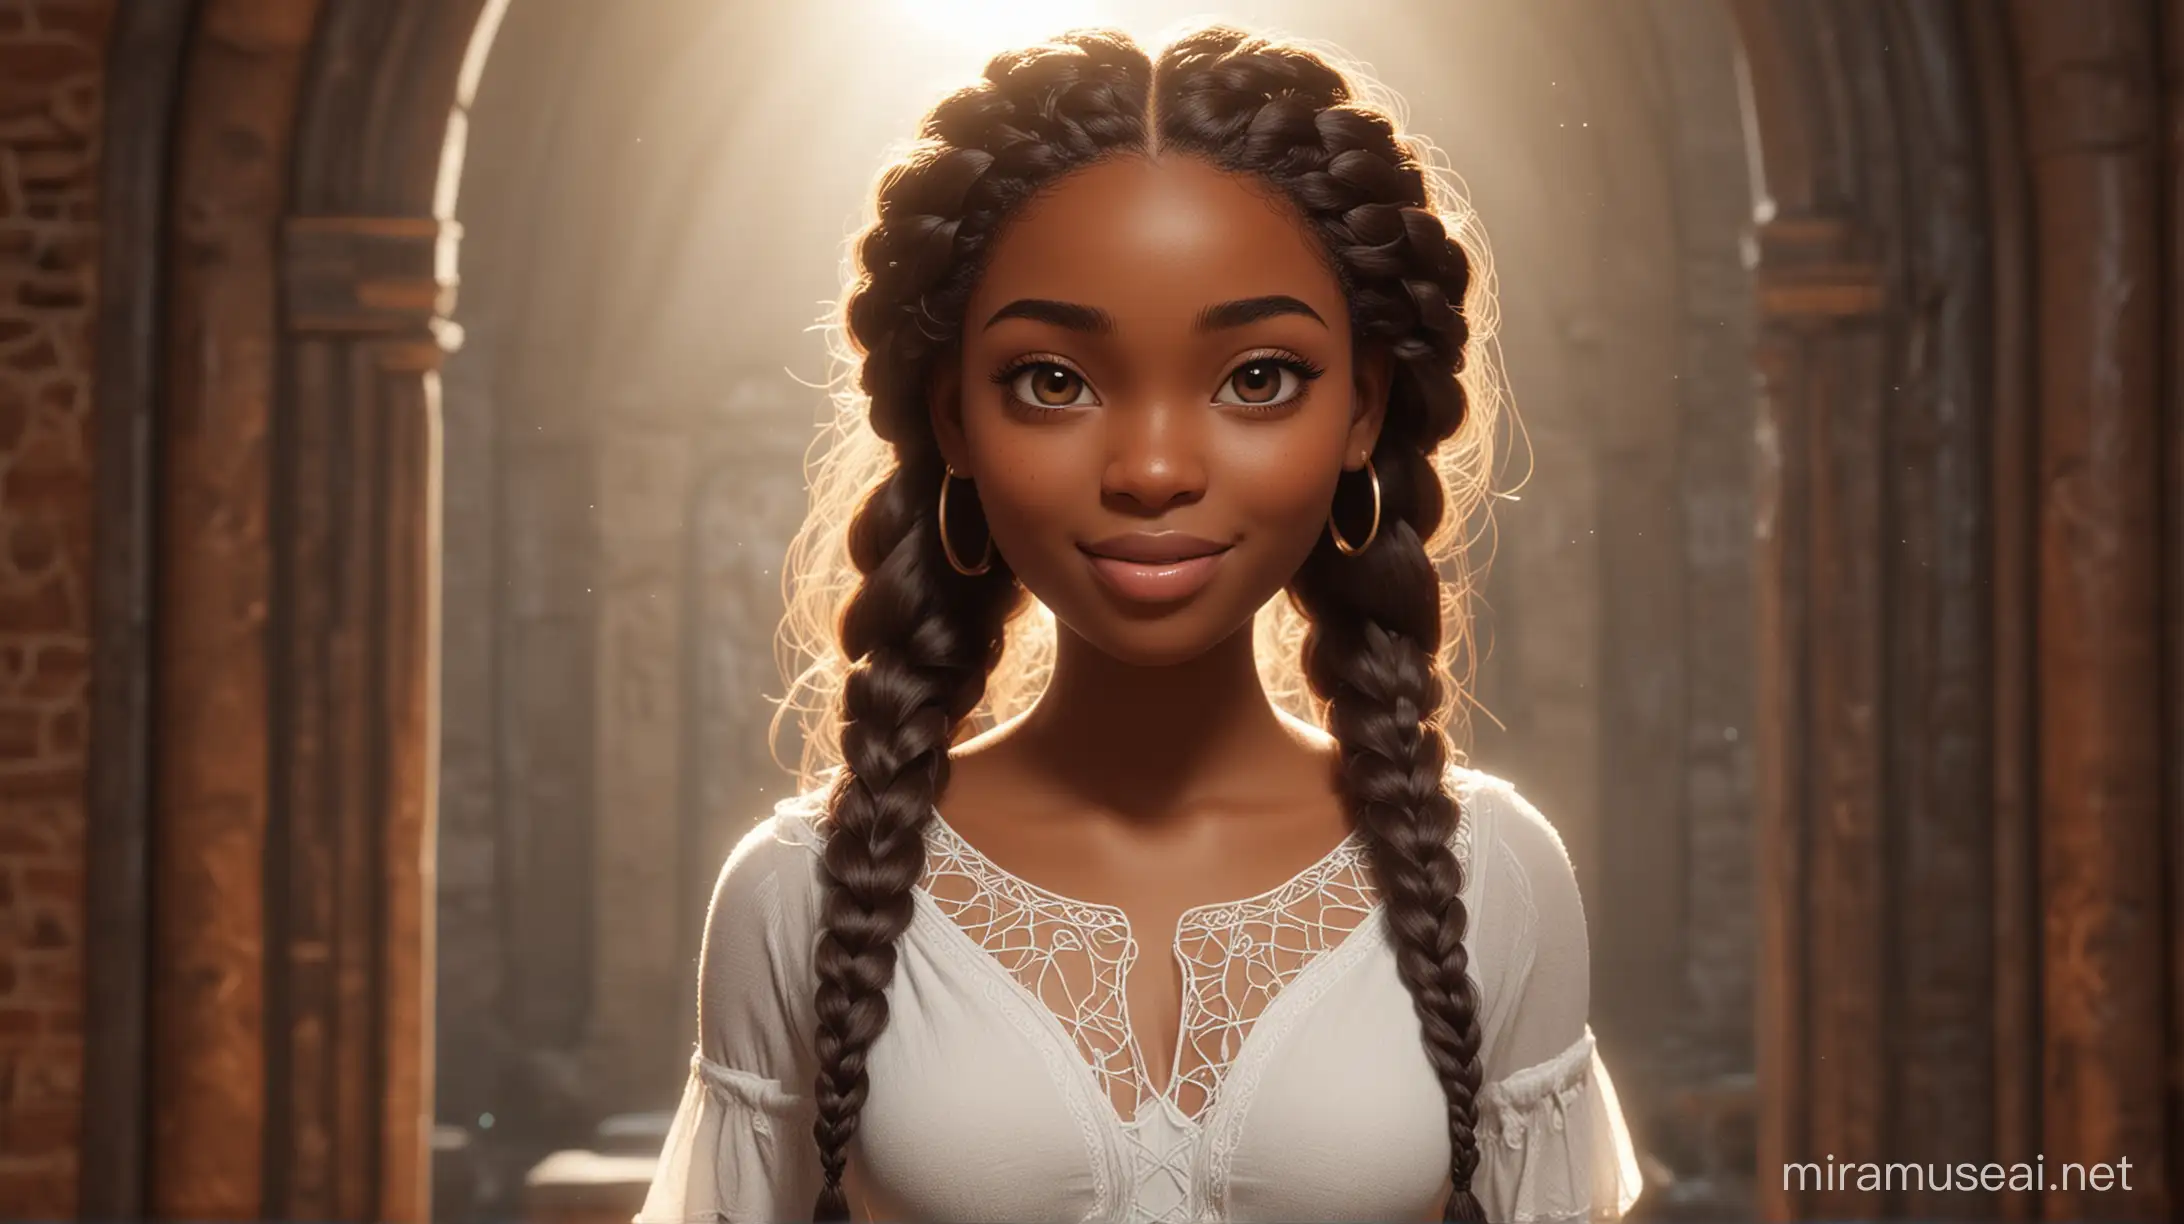 African Woman with Braids in Magical Portal